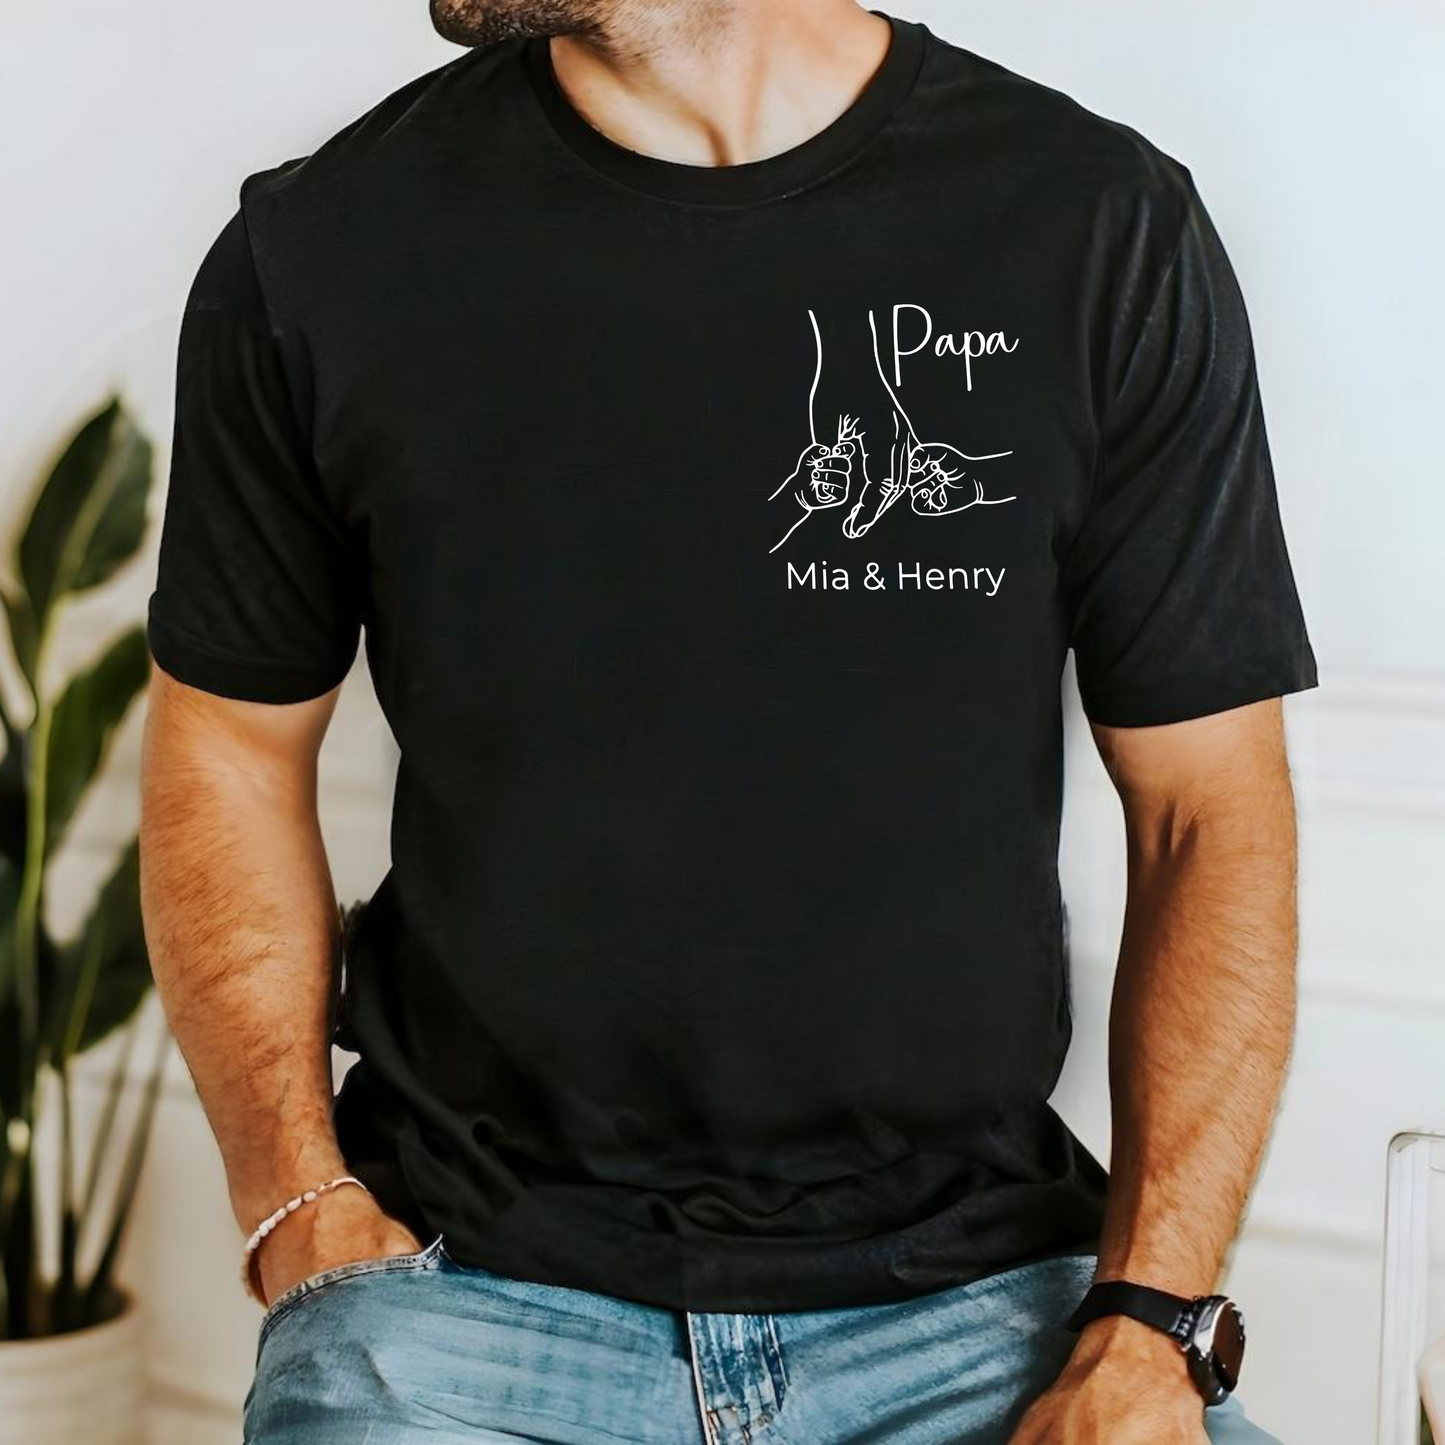 Customizable Dad Shirt – Personalize with Title and Names for Father's Day